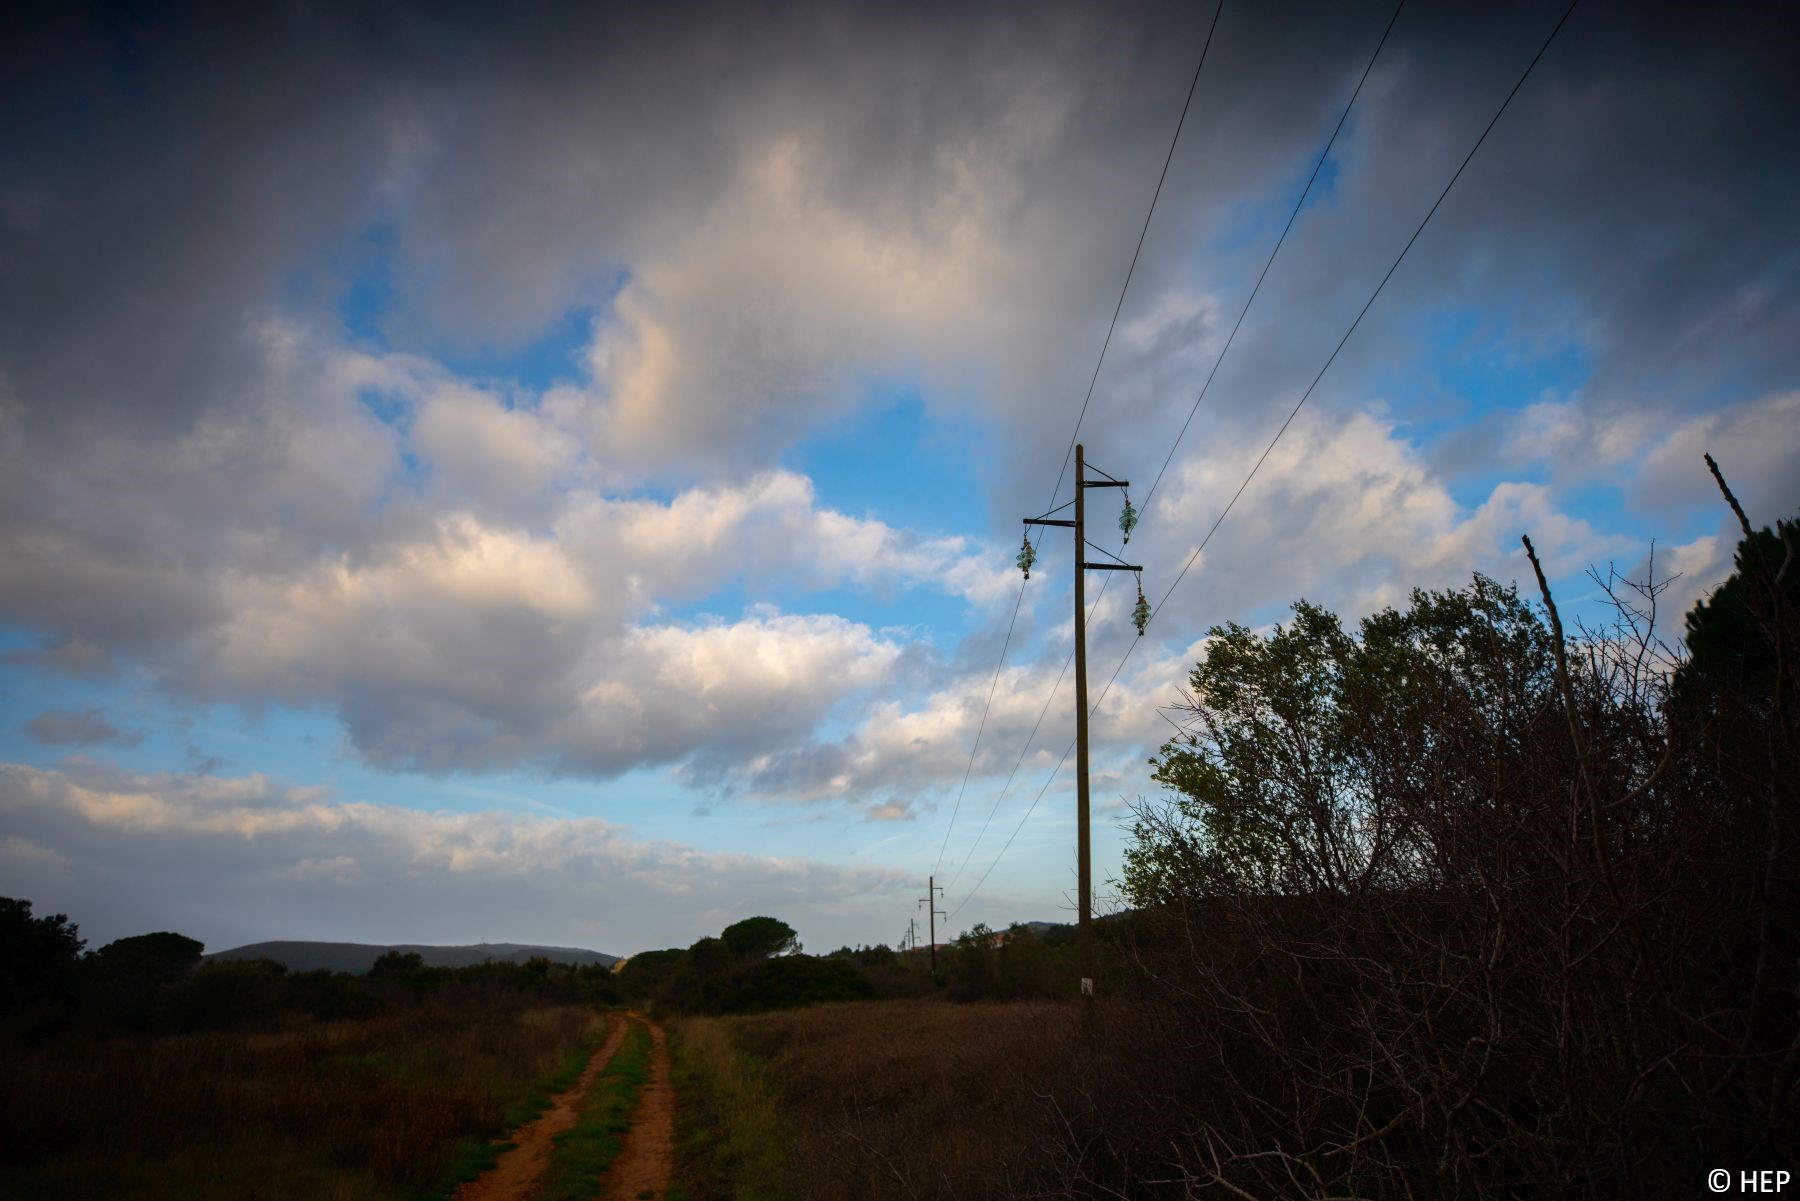 Picture of the rural power lines